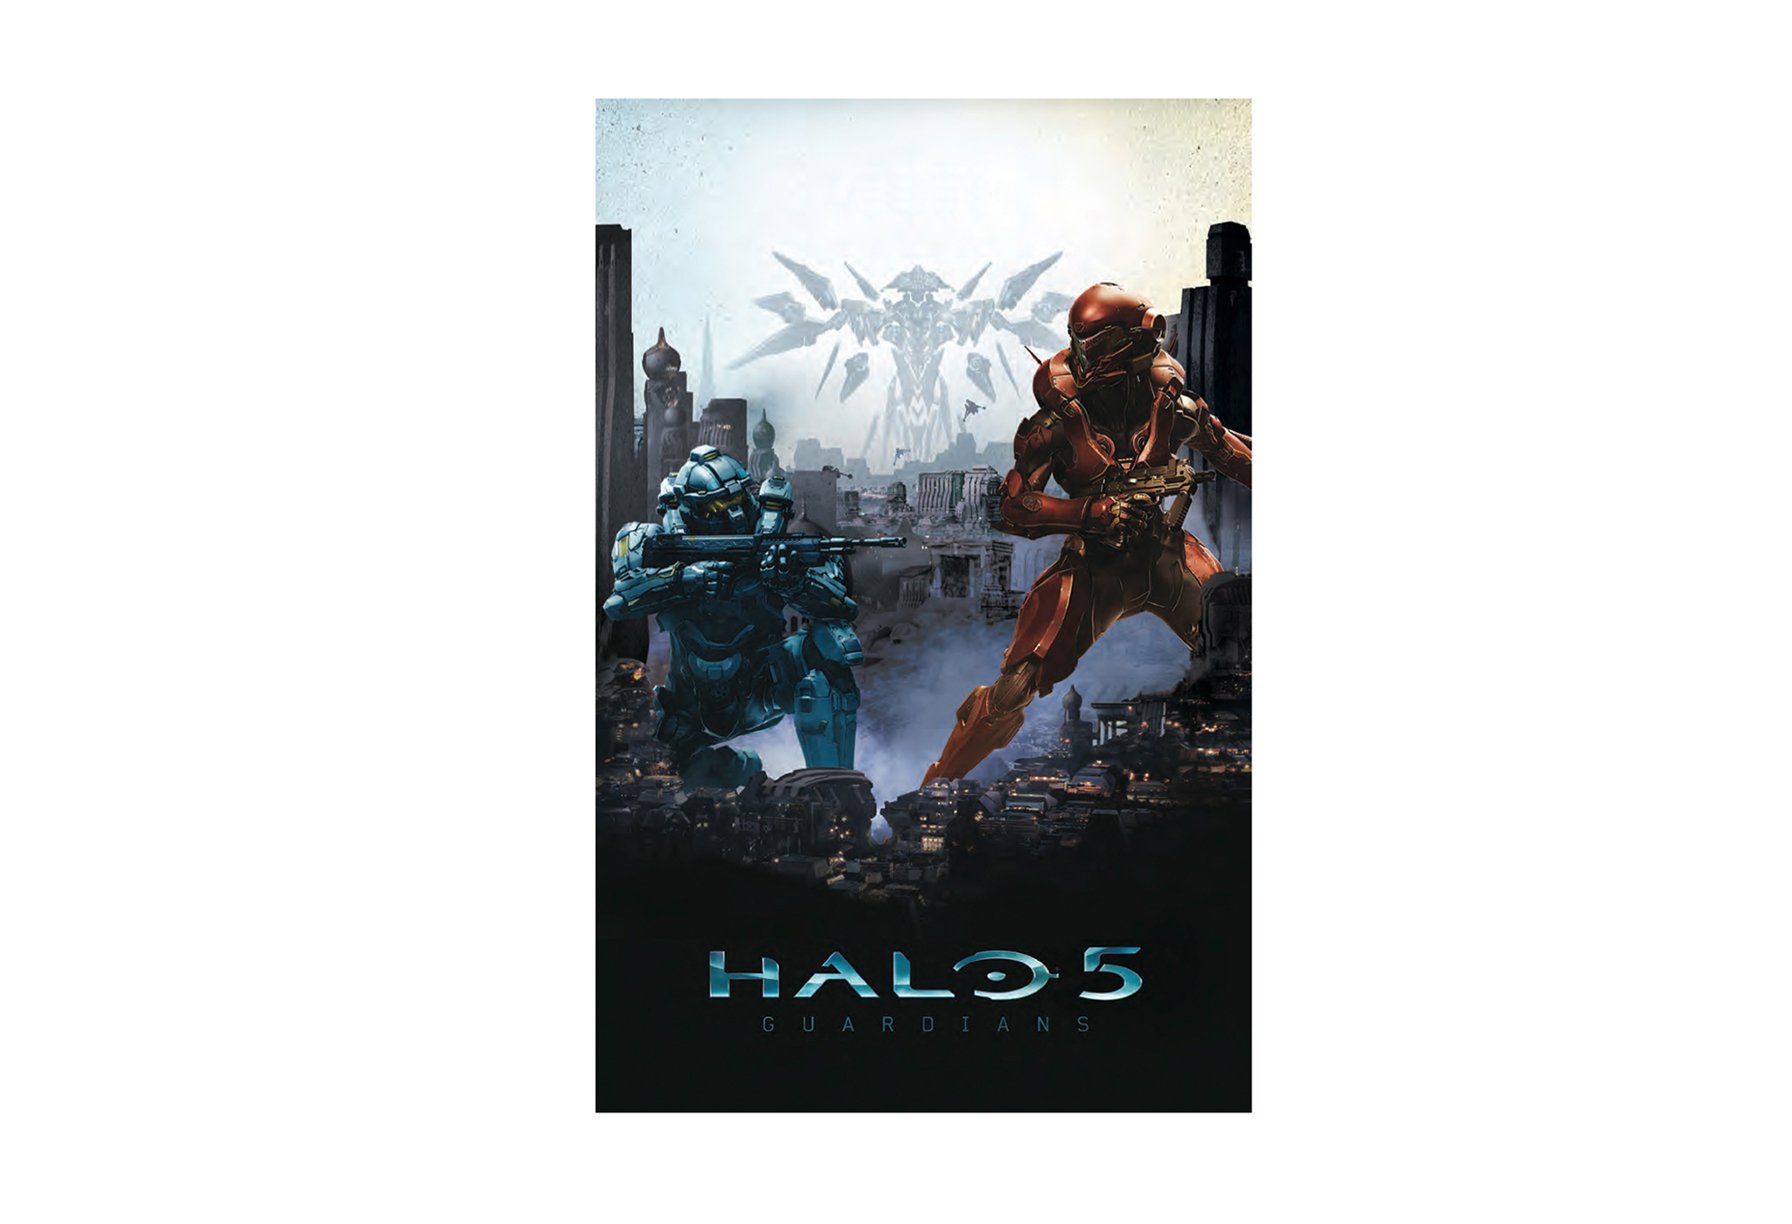 msft_halo_intro_store_poster2.jpg